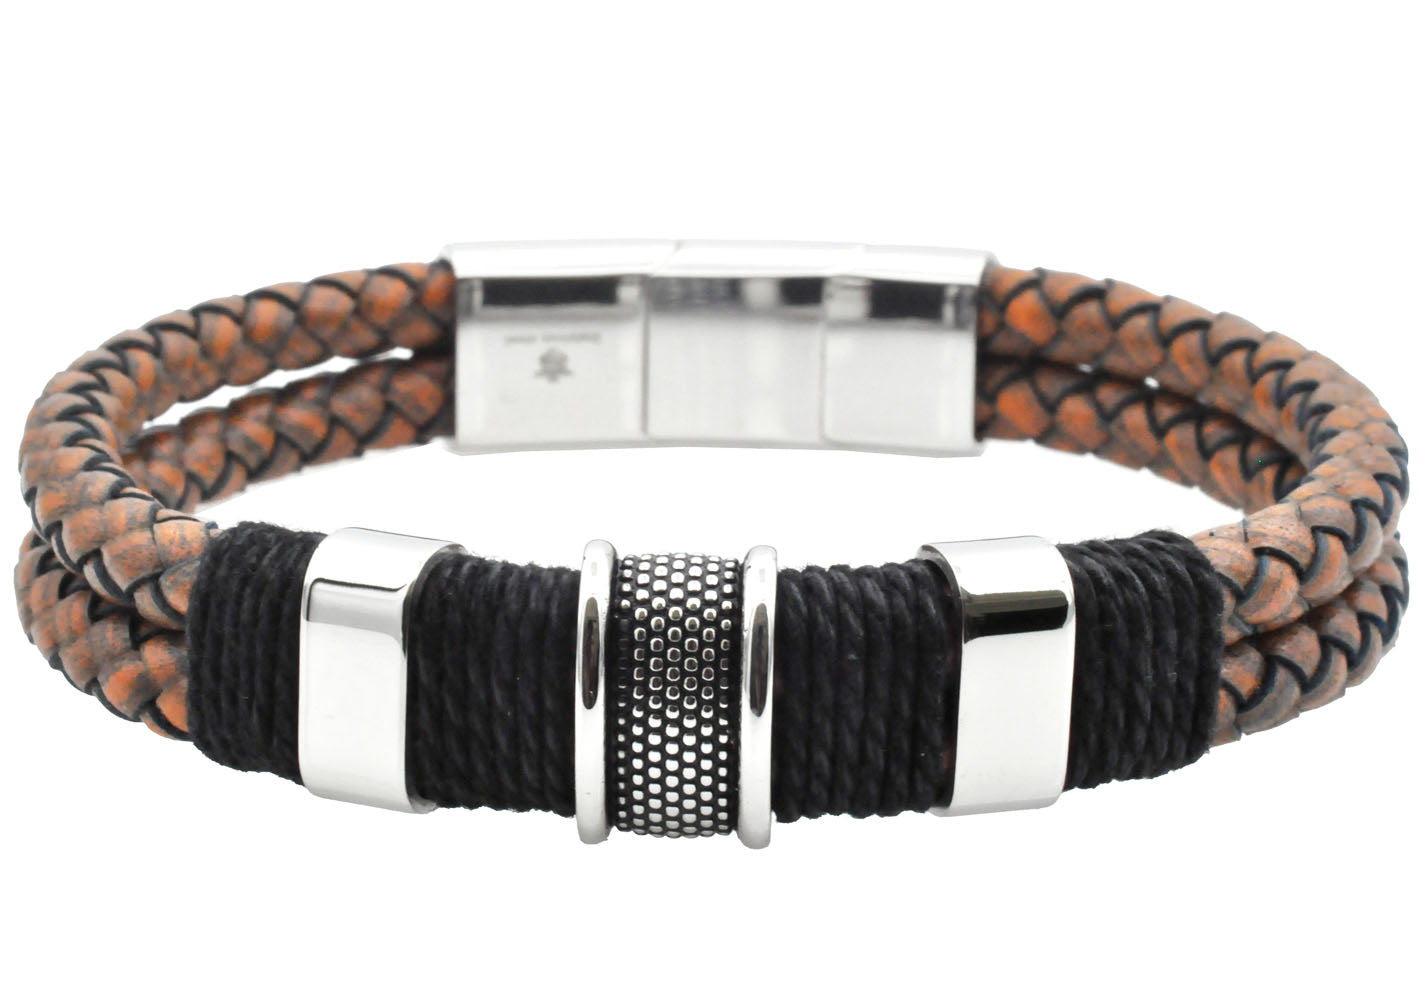 COOLSTEELANDBEYOND Mens Double-Row Braided Leather Bracelet Bangle  Wristband with Stainless Steel Ornaments